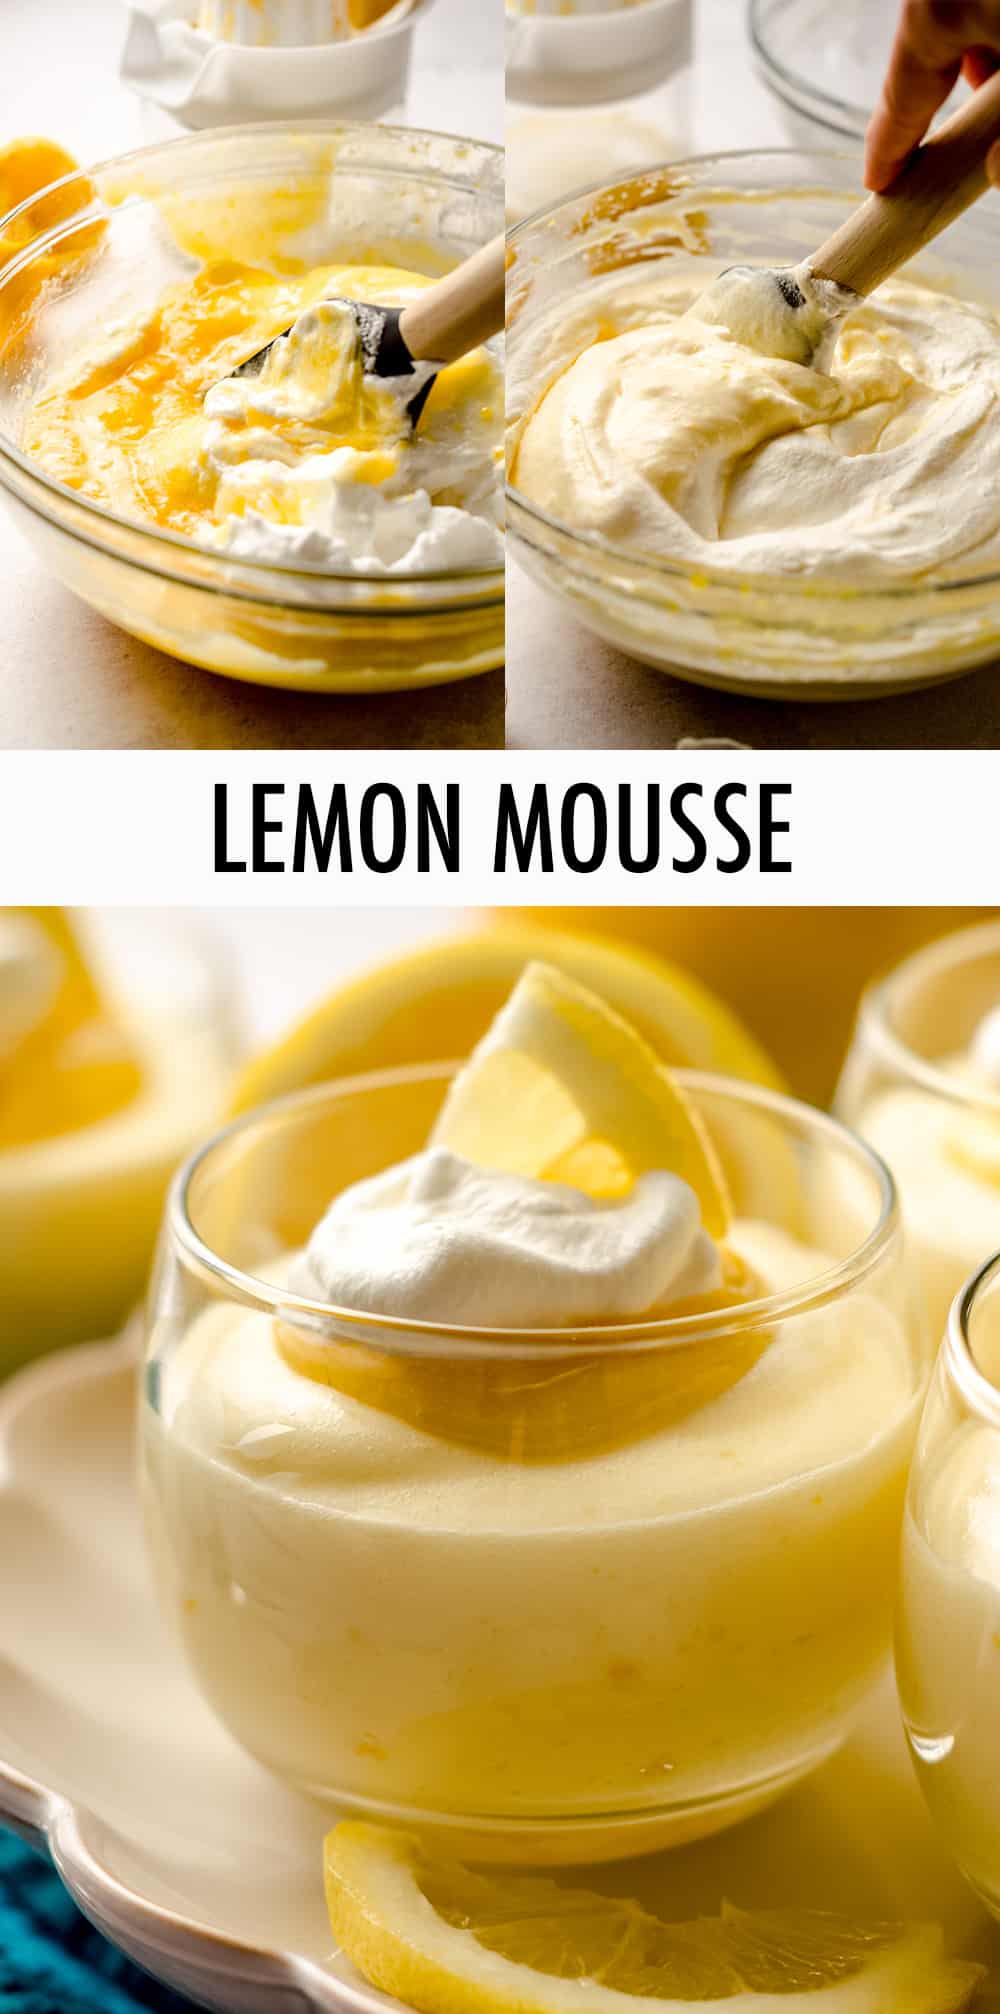 A traditional easy lemon mousse recipe made with just five simple ingredients. The perfect way to use fresh lemons for a light and refreshing dessert. via @frshaprilflours